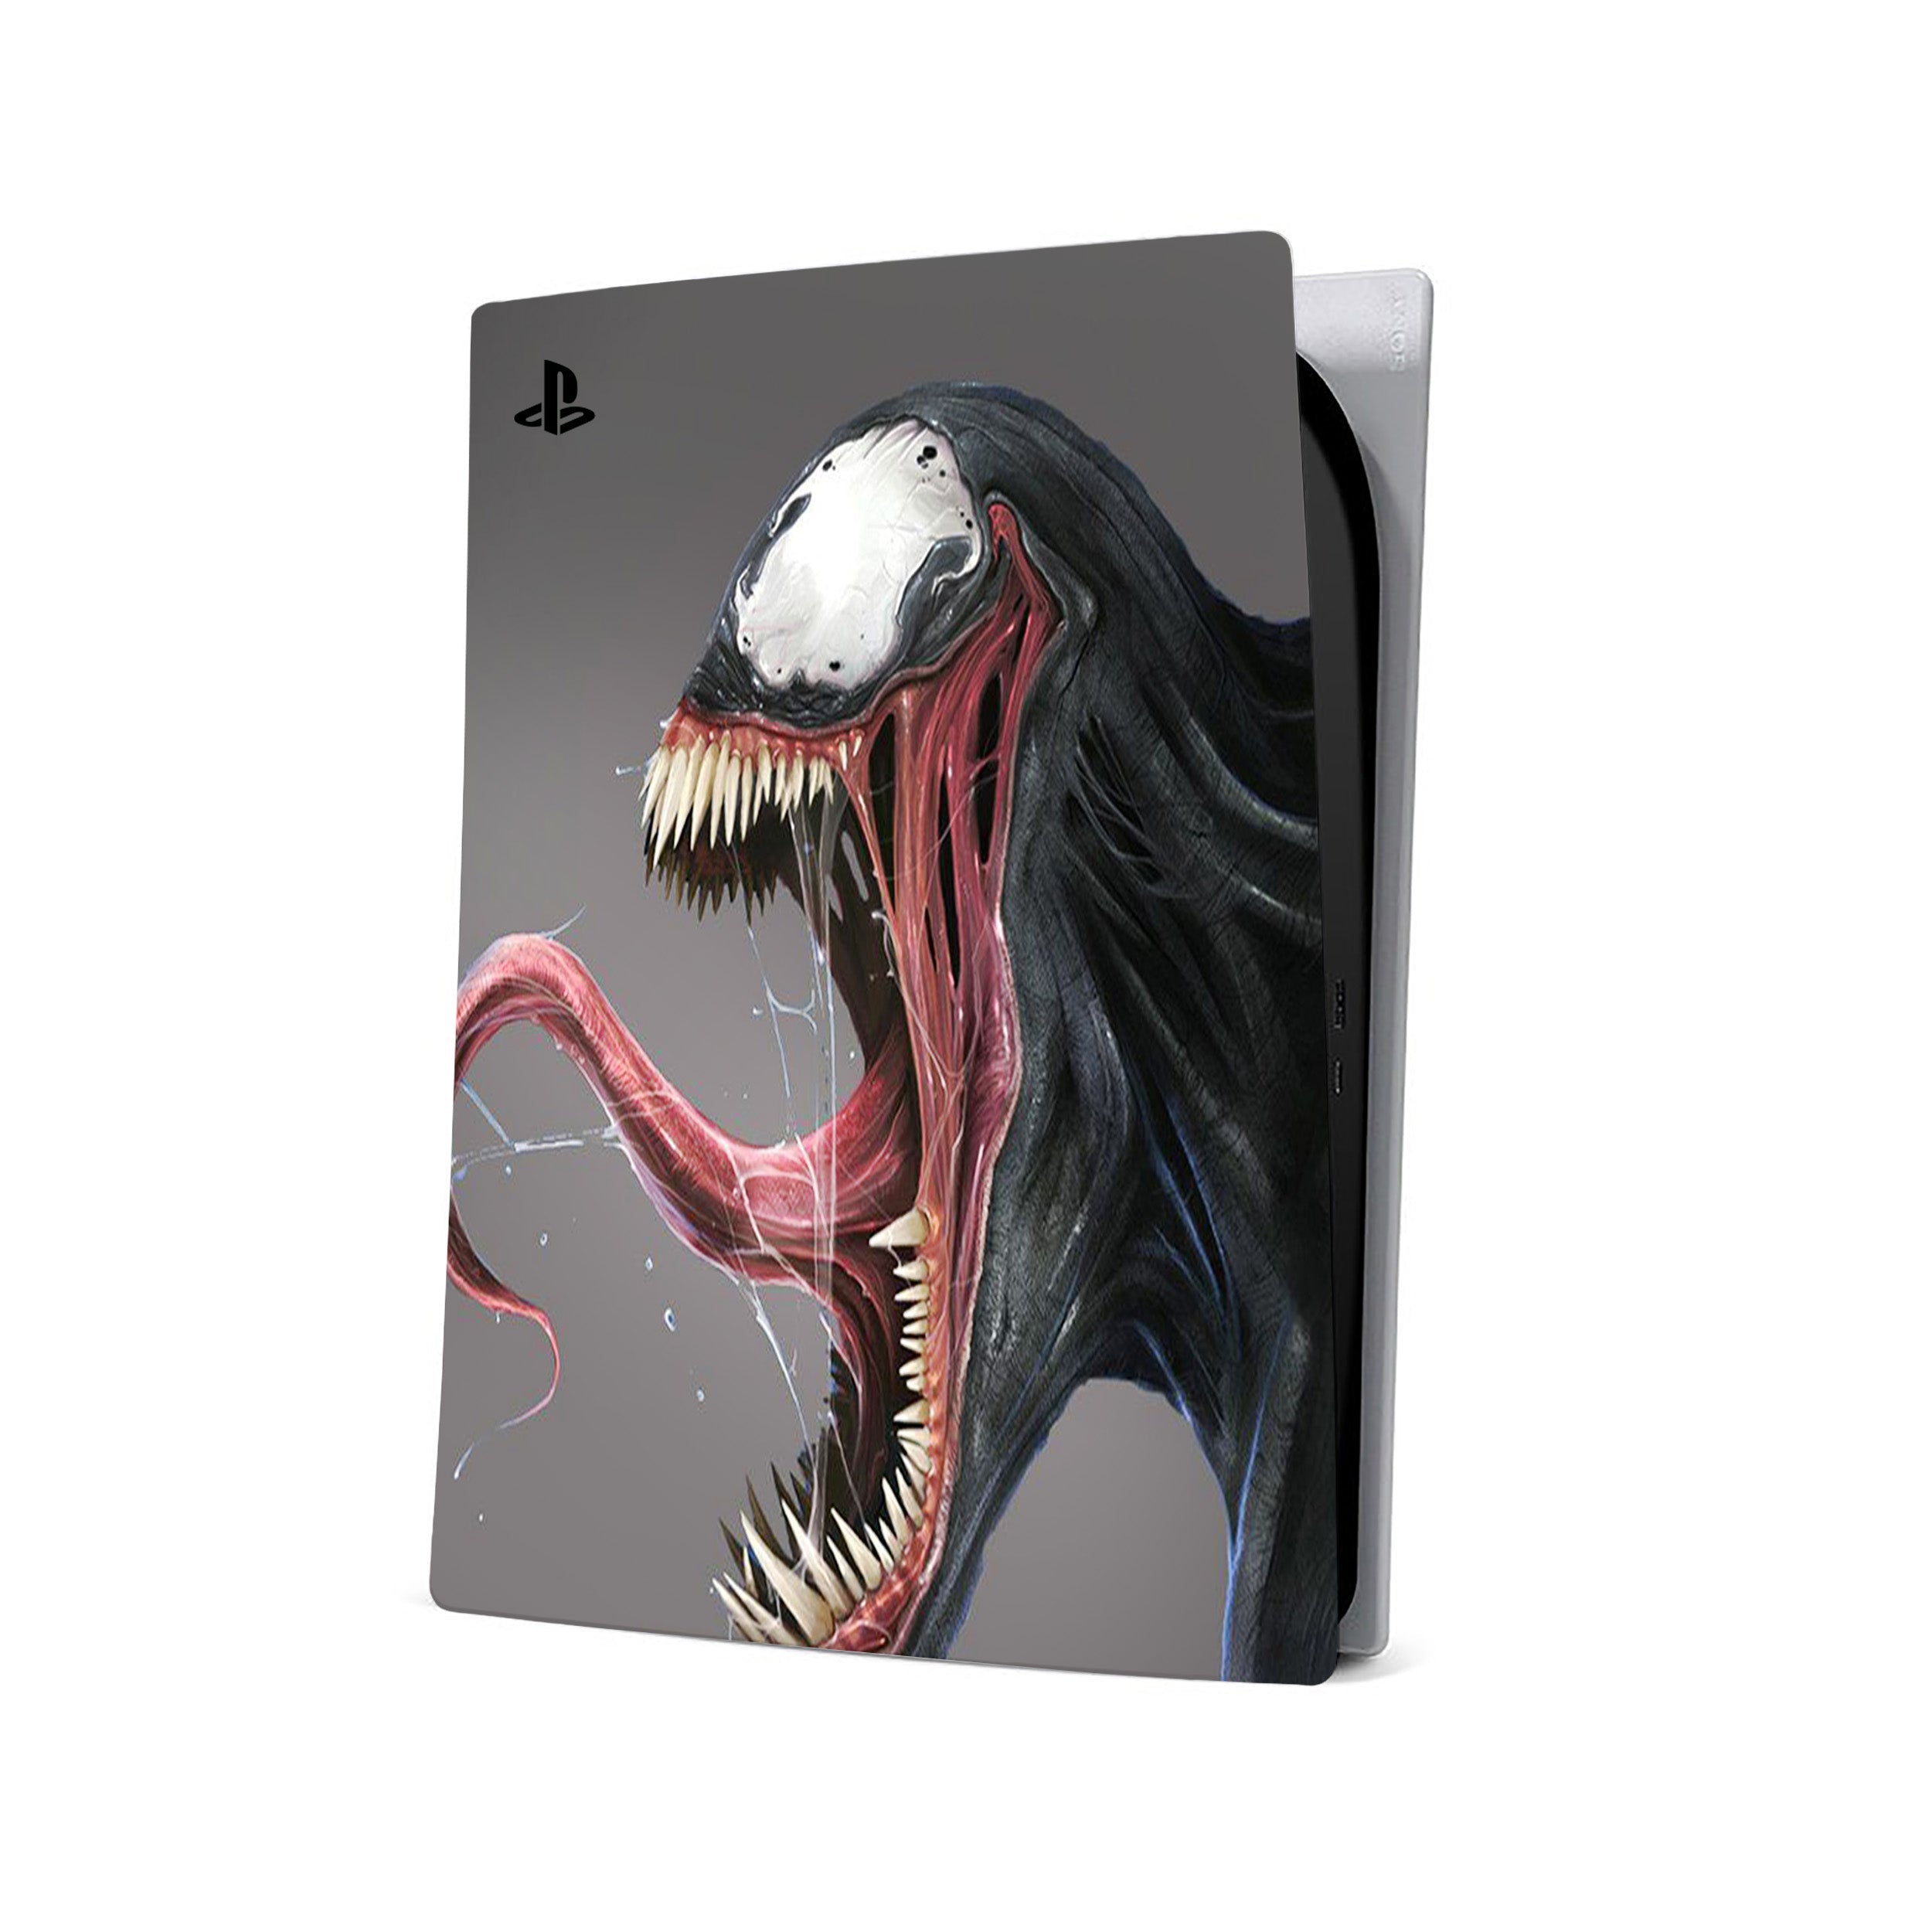 A video game skin featuring a Marvel Venom design for the PS5.